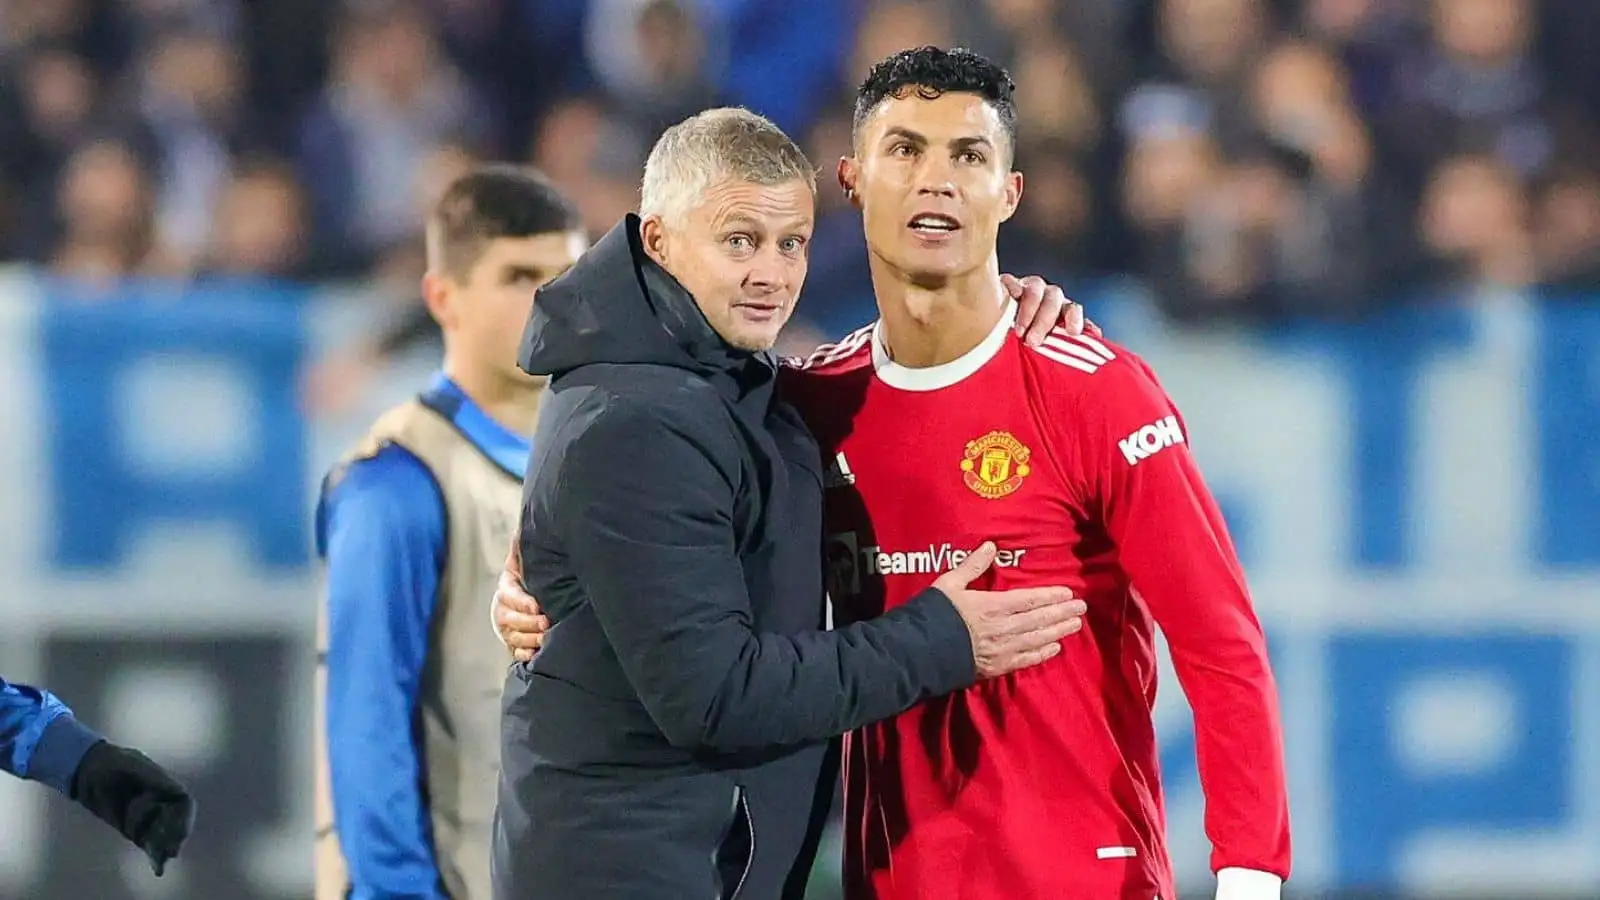 Ole Gunnar Solskjaer Manager of Manchester United and Cristiano Ronaldo (7) of Manchester United celebrates at full time during the UEFA Champions League, Group F football match between Atalanta BC and Manchester United on November 2, 2021 at Gewiss Stadium in Bergamo